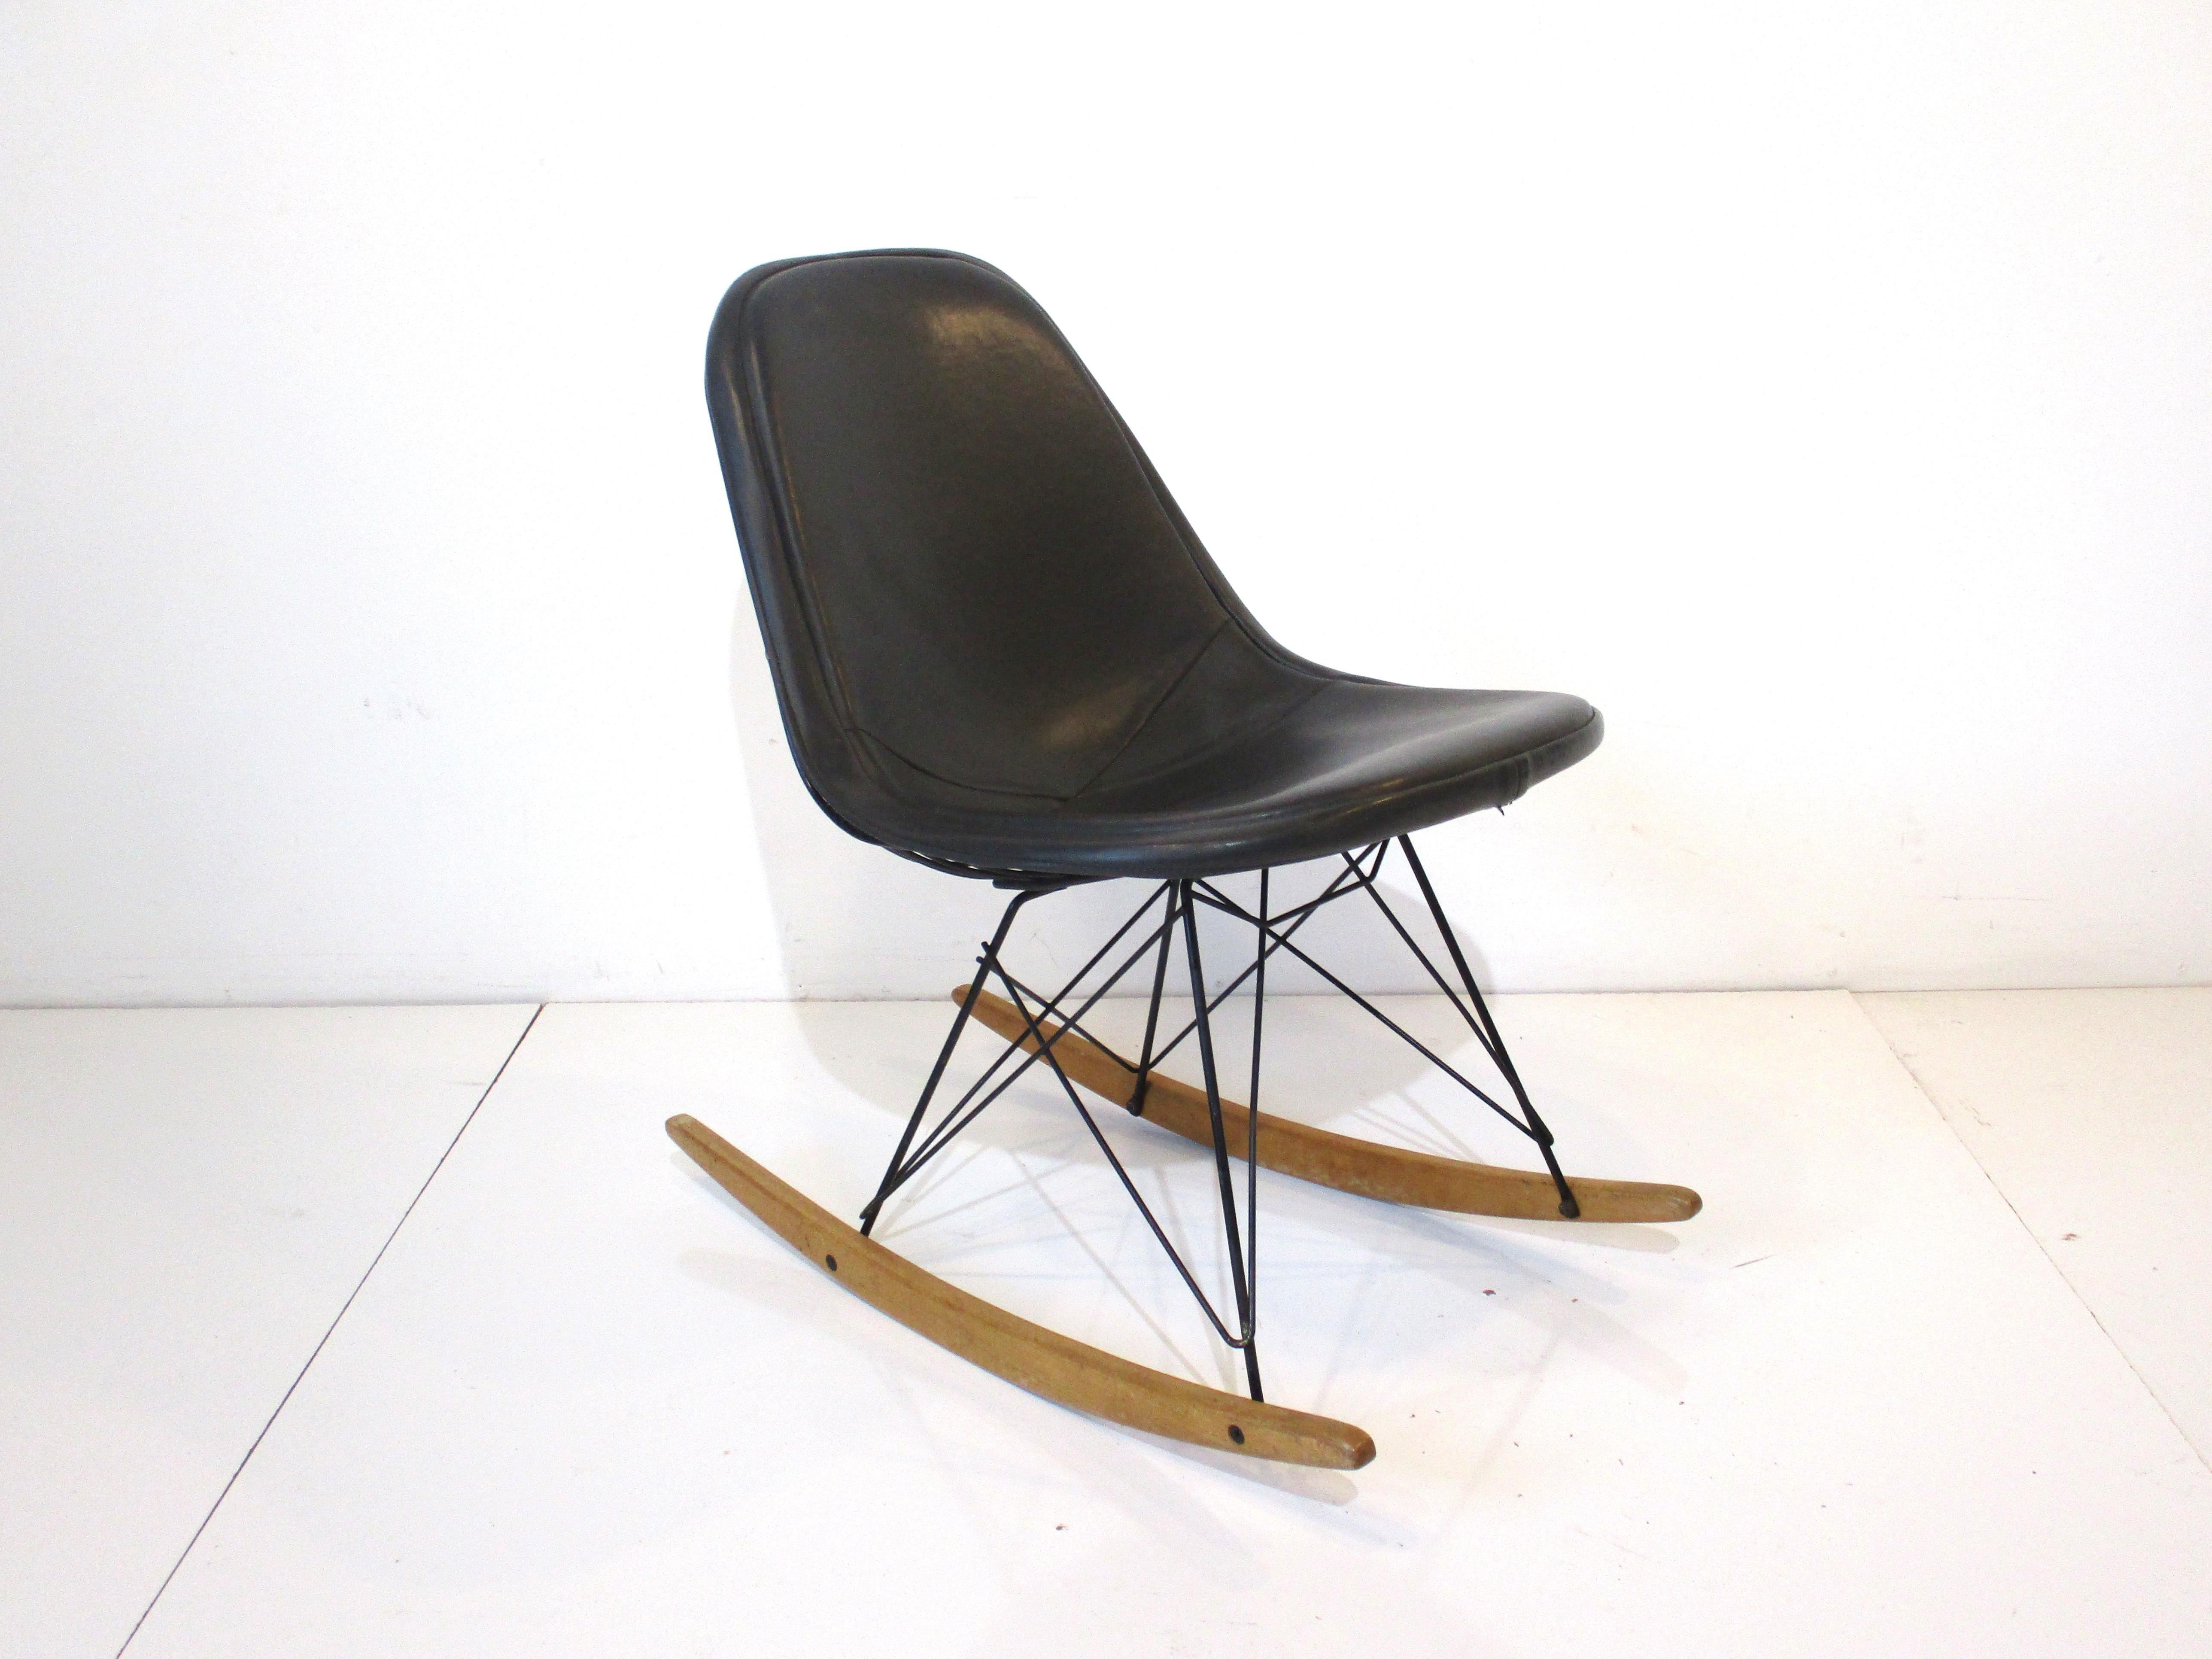 A rare satin black metal wire Eames rocking chair with birch wood runners and dark charcoal Naugahyde upholstered seat cover. The chair retains the fabric tag to the cover made by the Herman Miller furniture company Pasadena California.